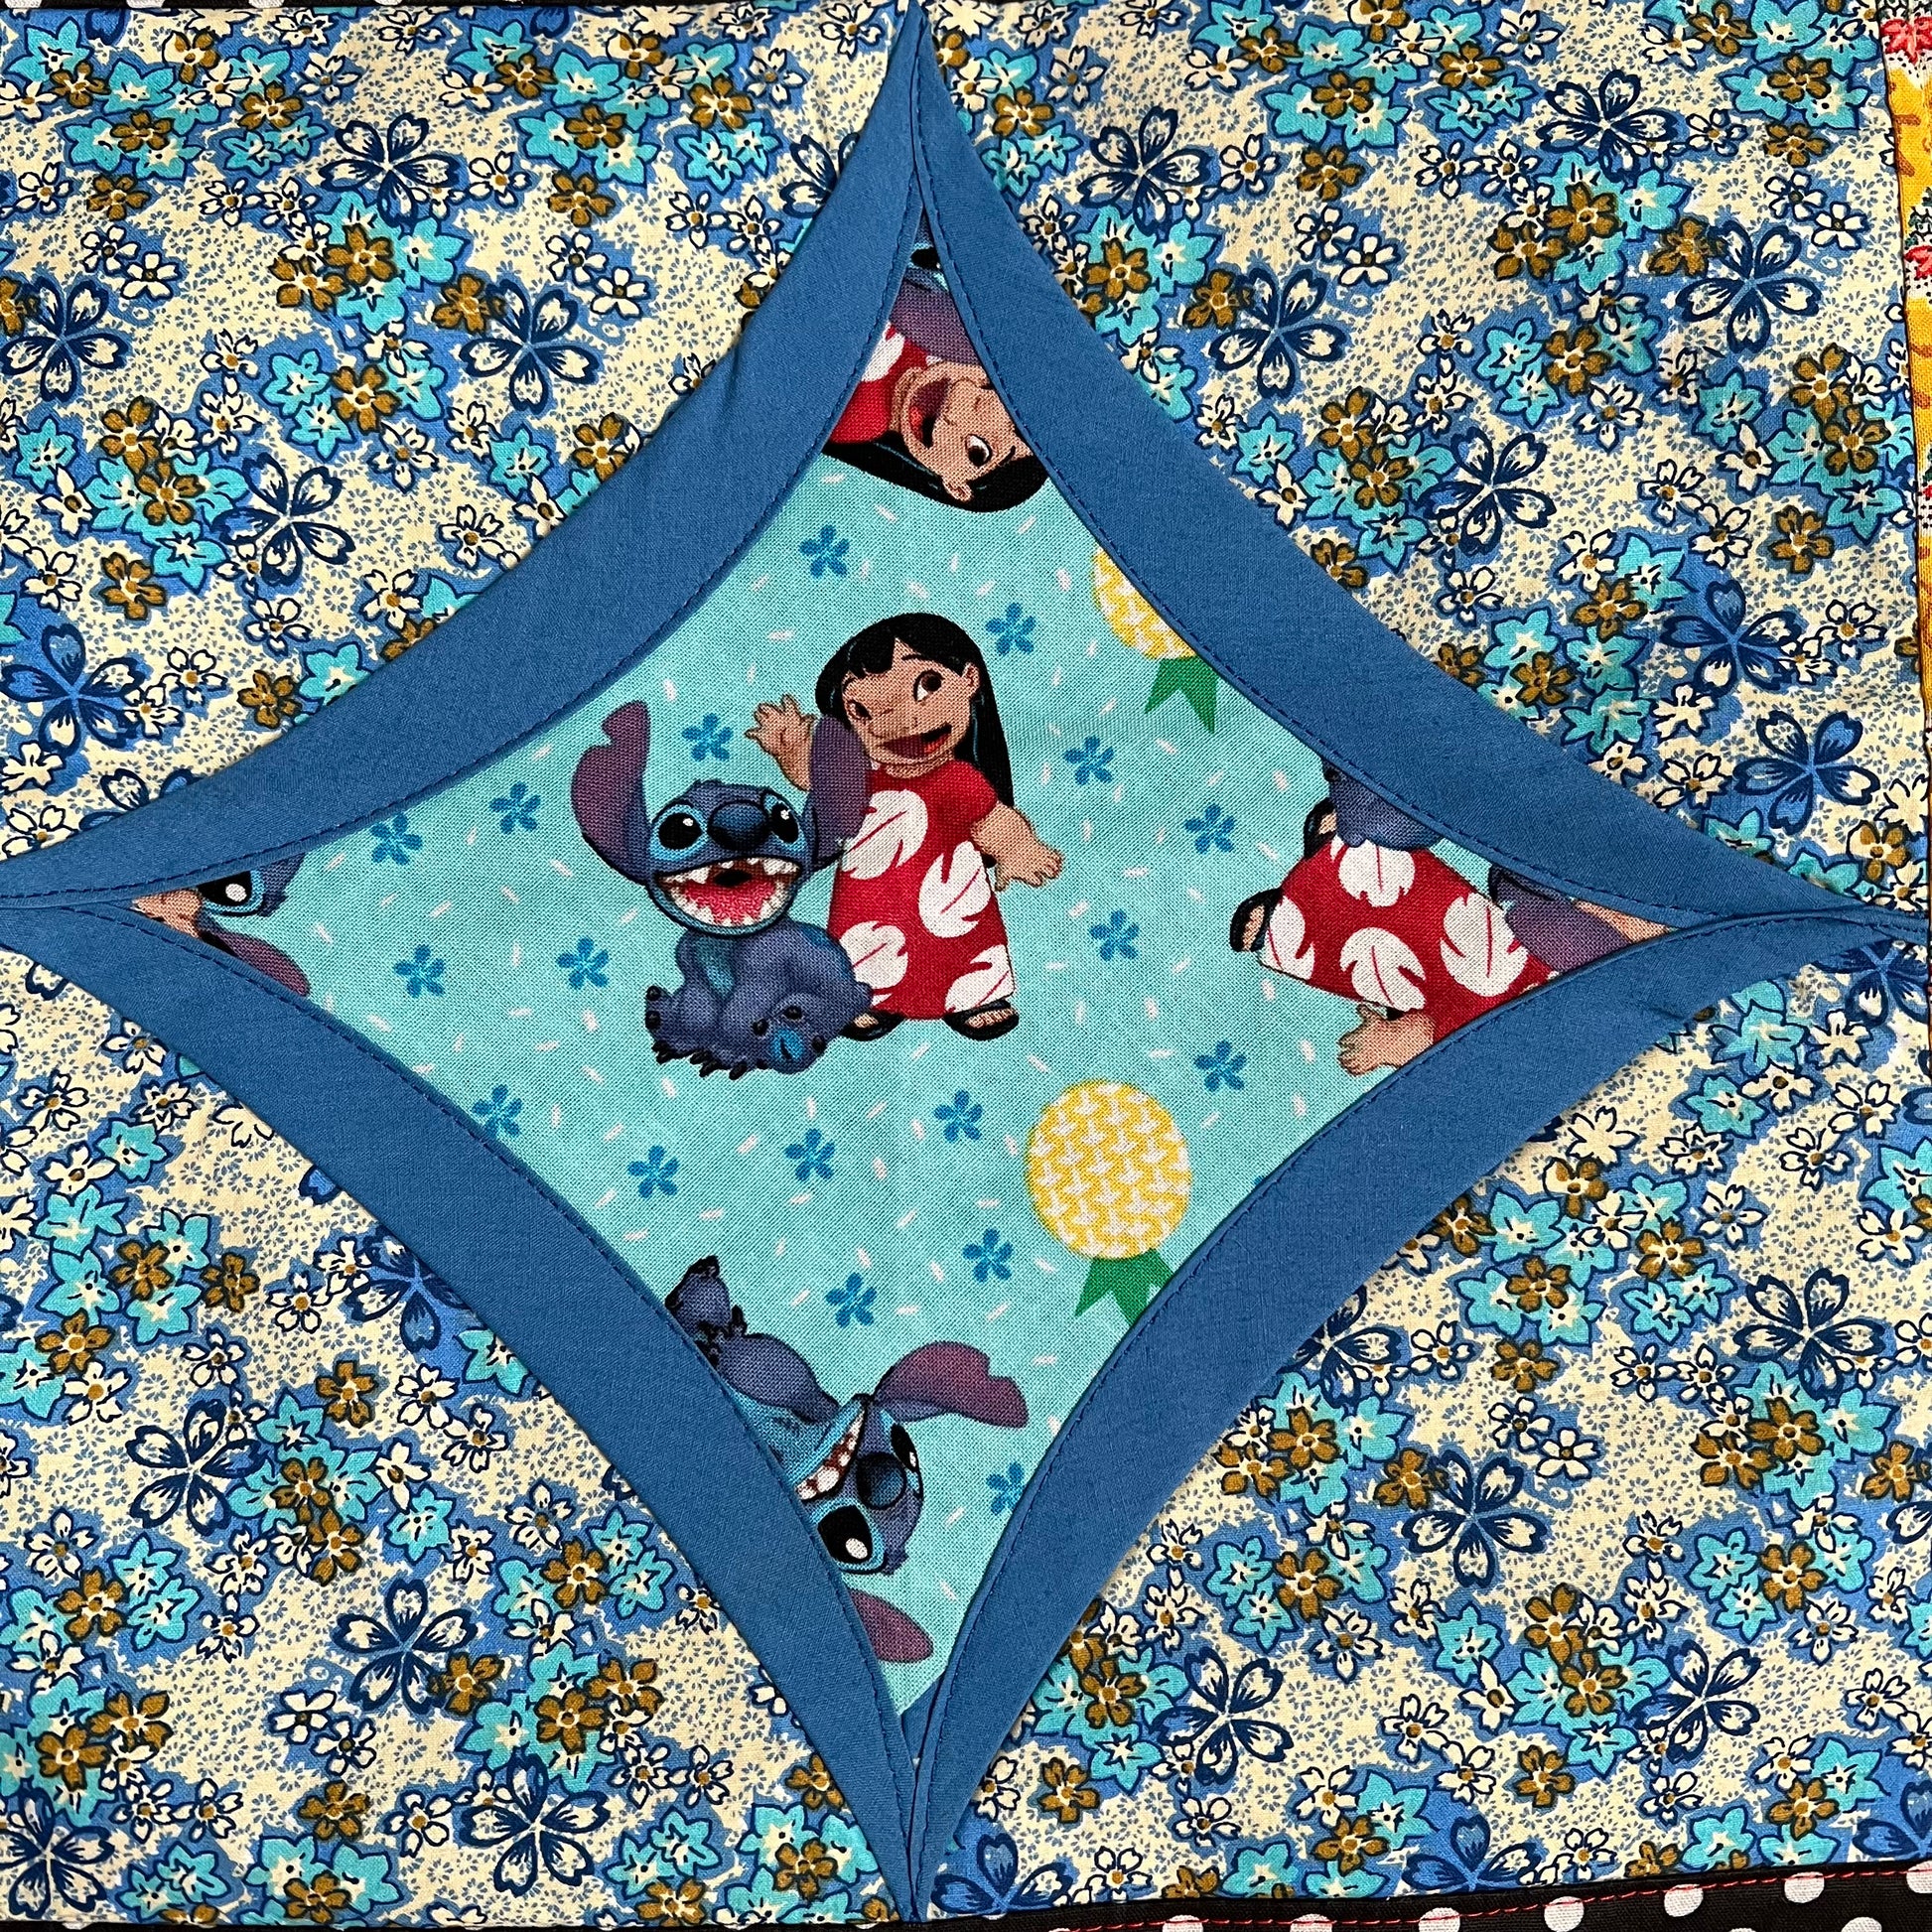 Lilo and Stitch fabric square, surrounded by blue and then blue floral fabrics